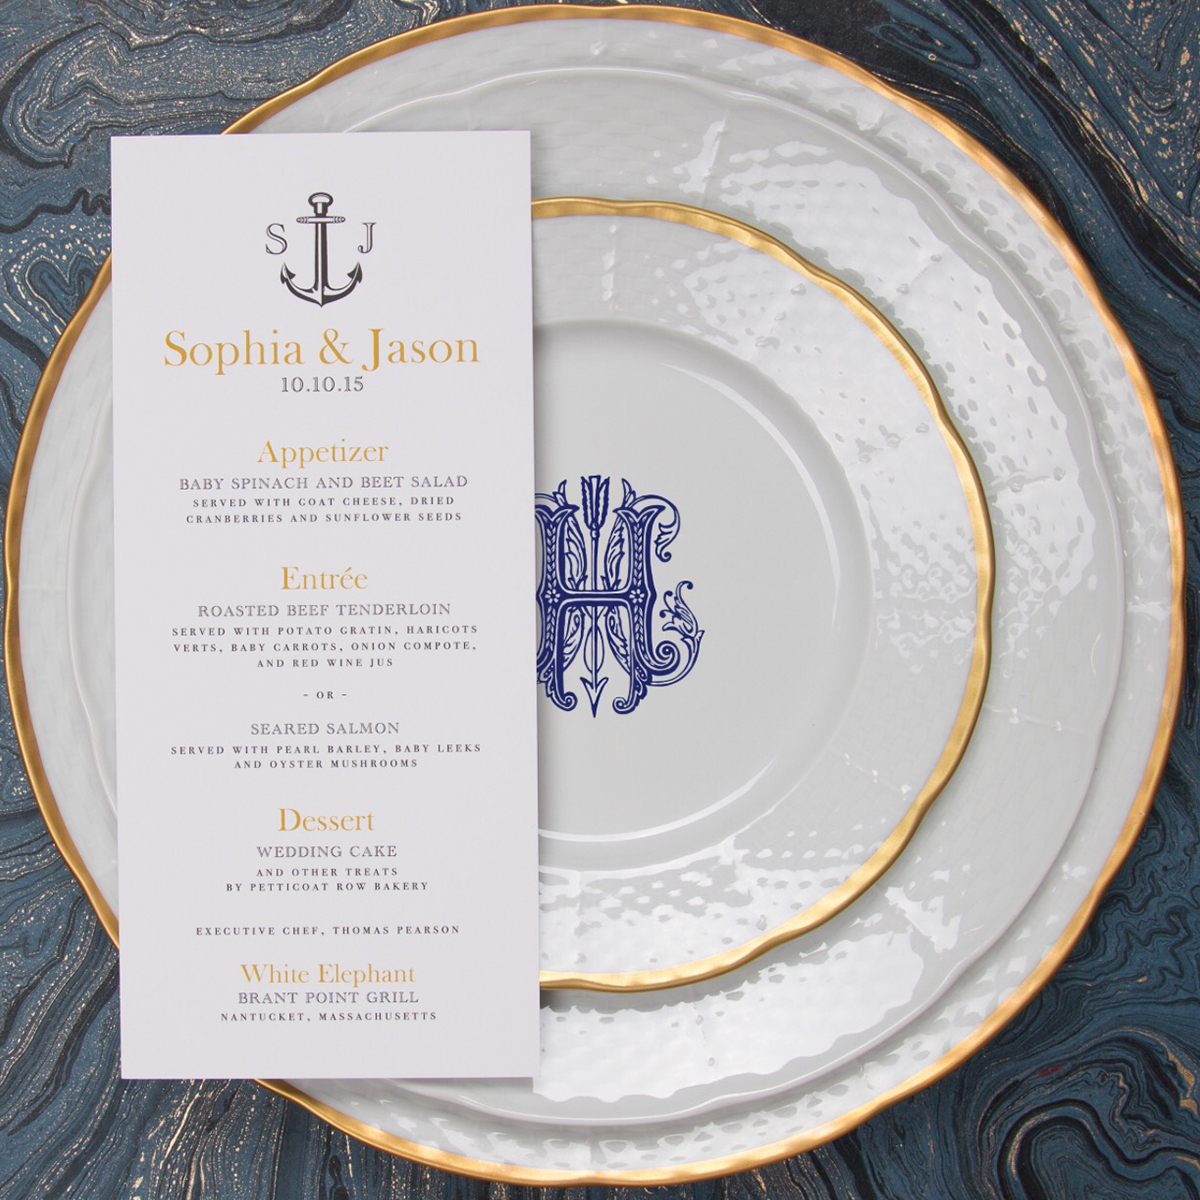 Dinnerware Tablescapes China Wedding Registry Ideas Monogrammed Unique Dishes Custom Tablesetting Sasha Nicholas Northern Virginia Lieb Photographic Southern Blue Blush Weave 24k Charger Plate